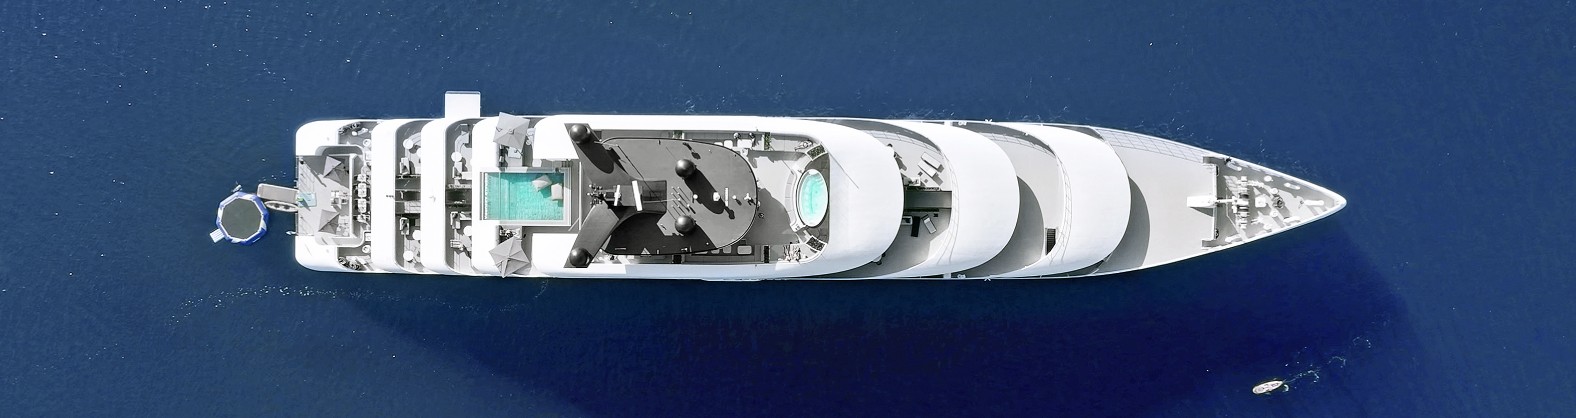 Top-down overhead exterior view of the Emerald Azzurra yacht